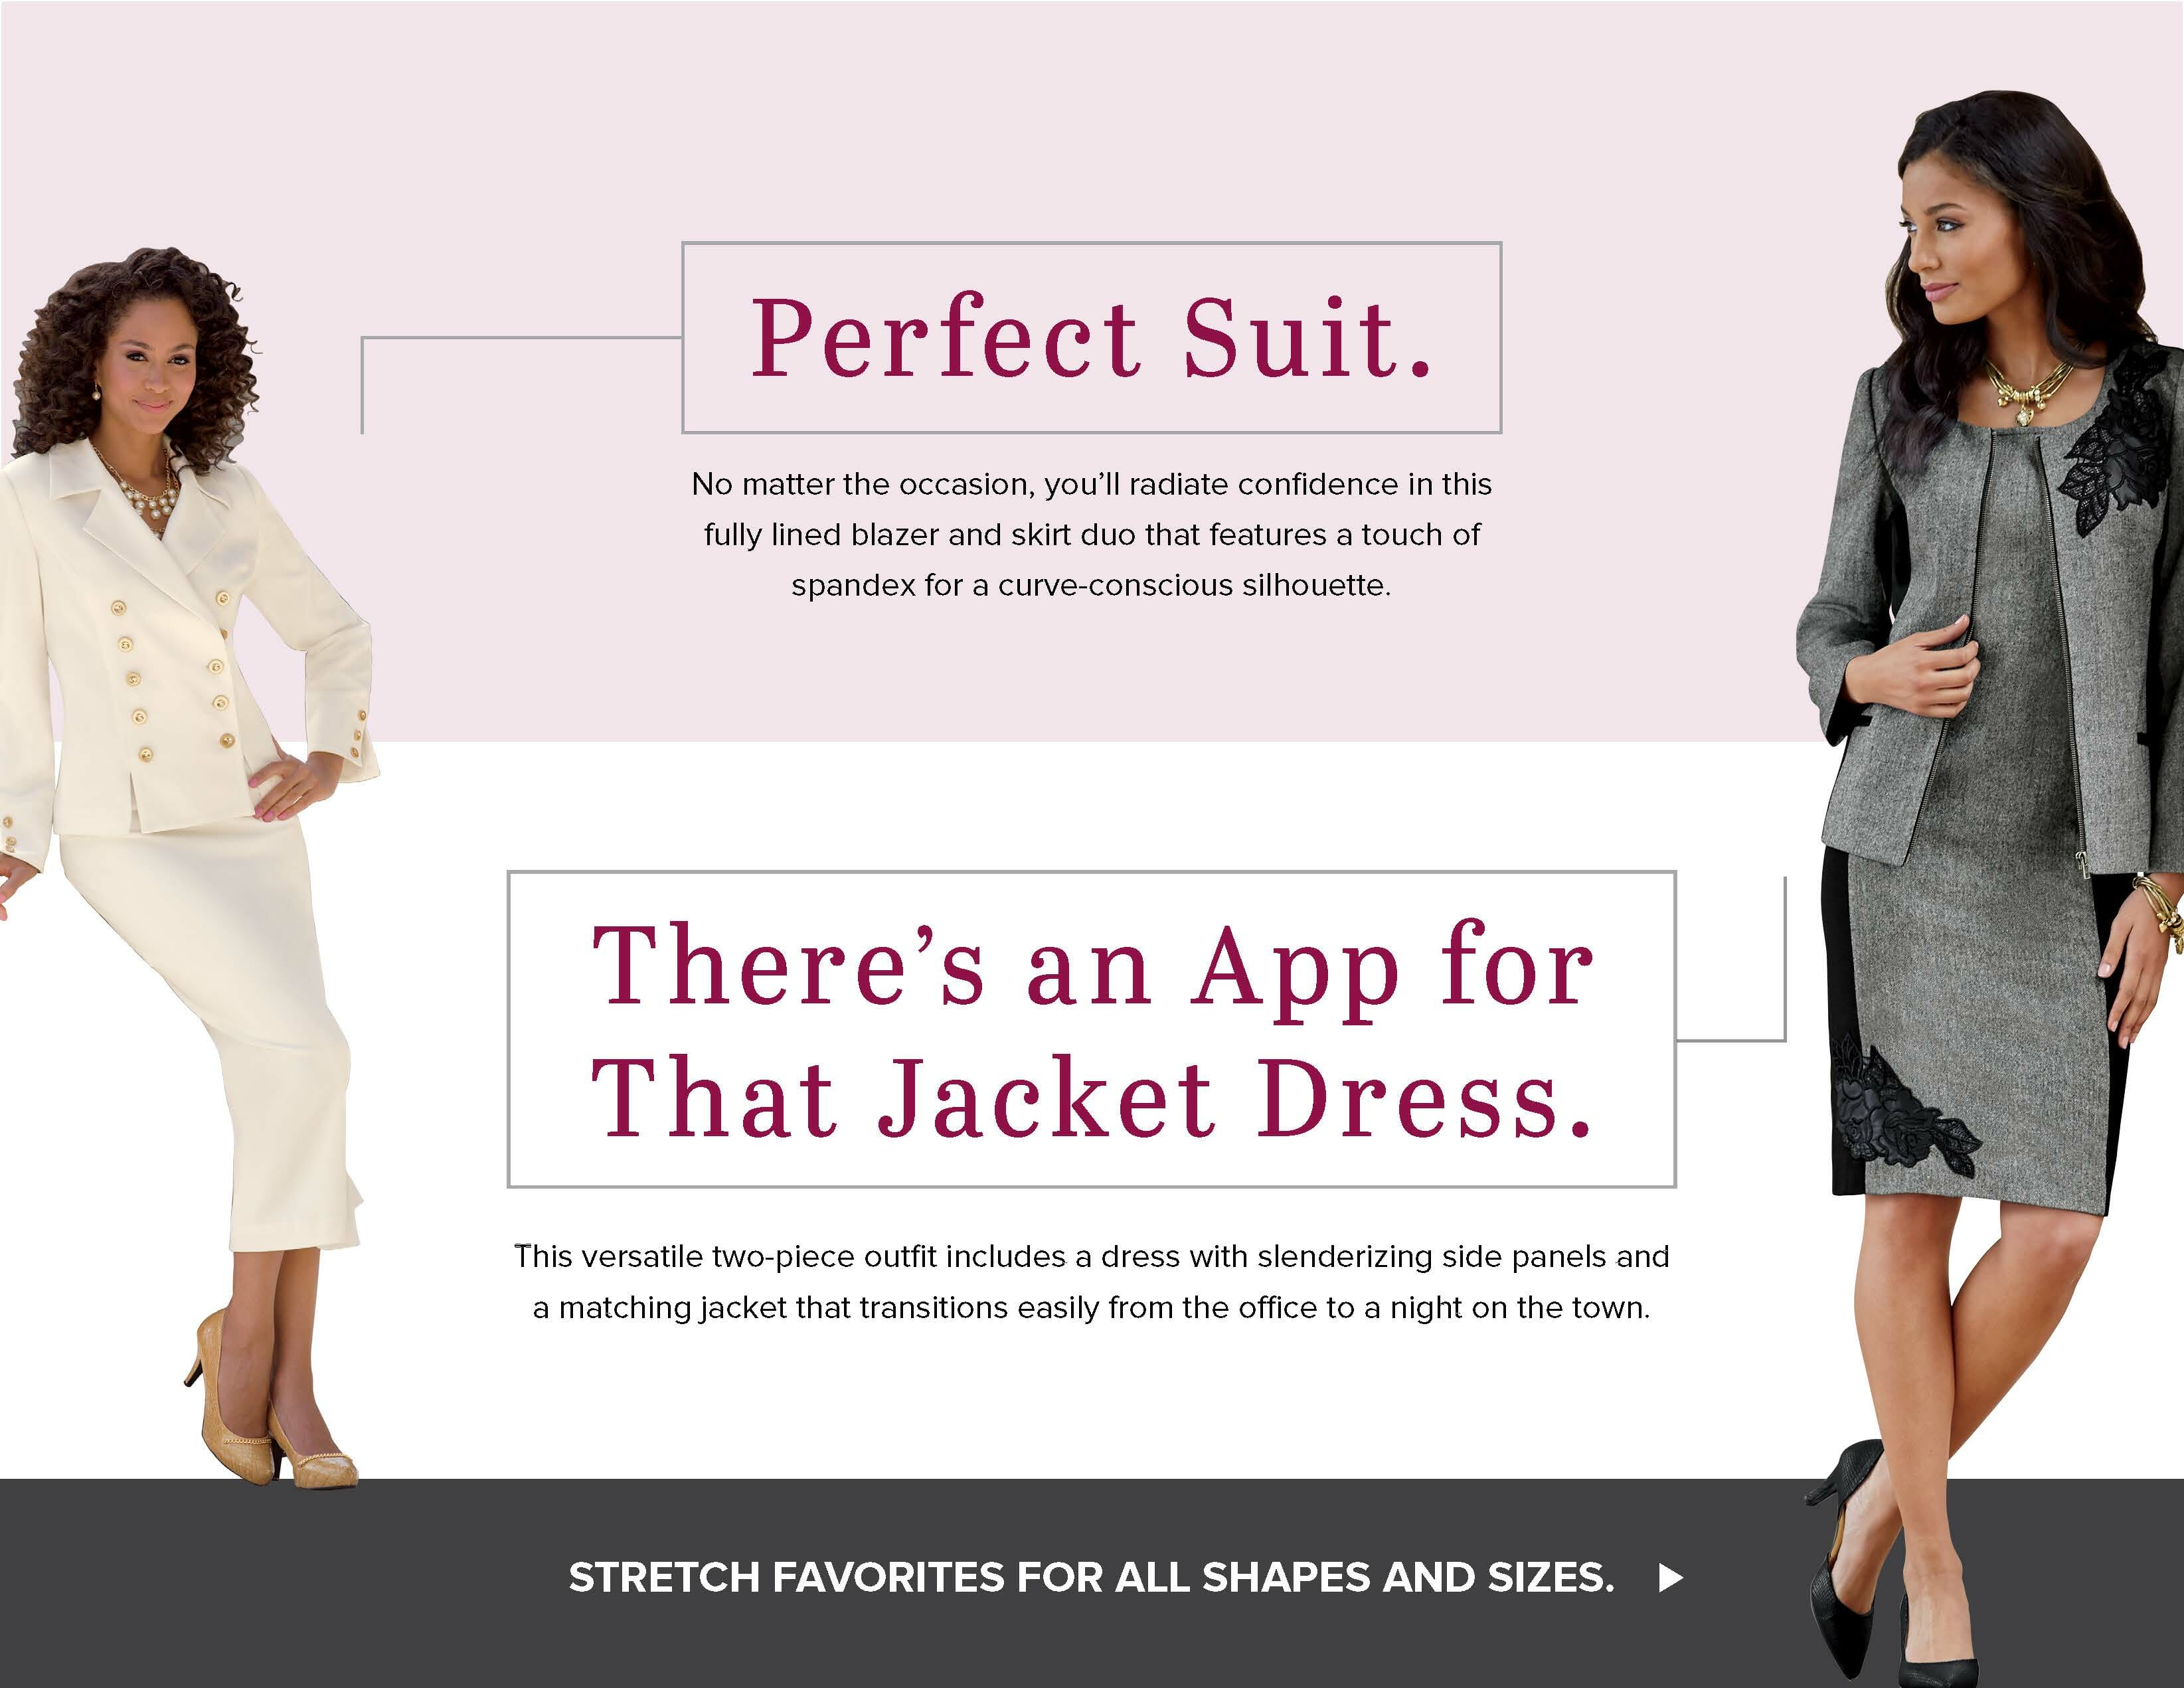 2 women in different styles of suit sets